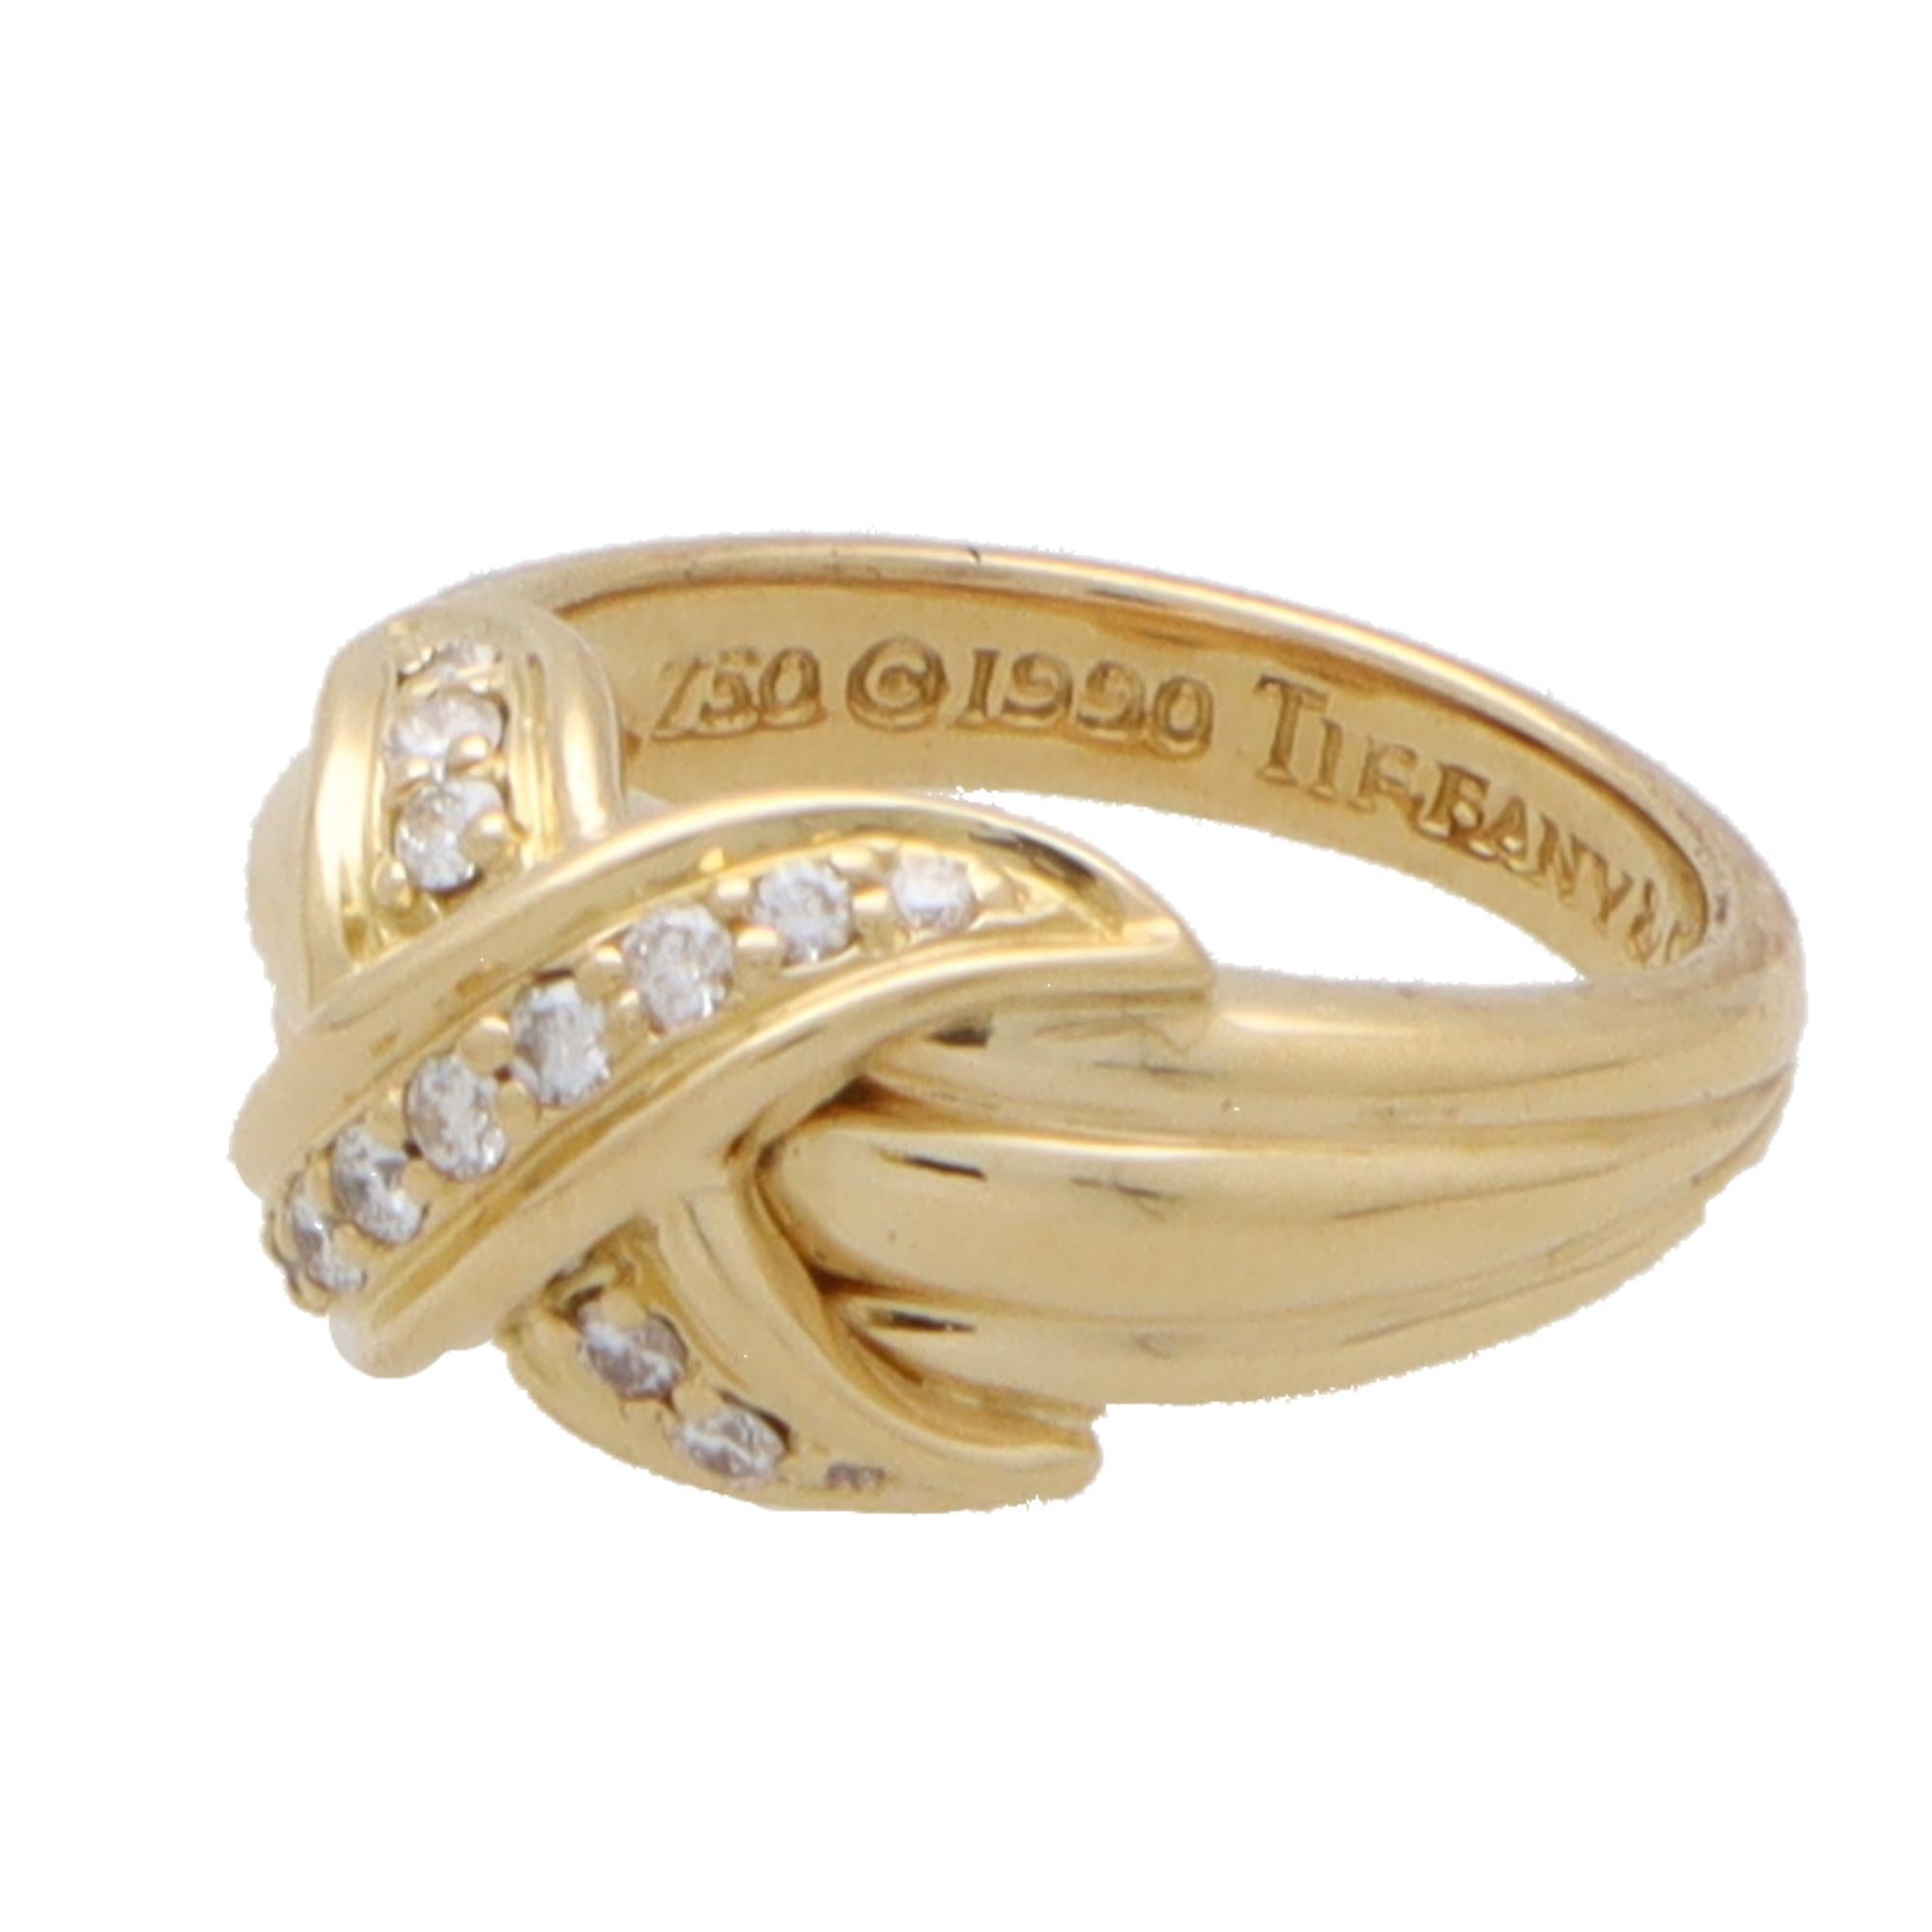 A beautiful vintage Tiffany & Co. signature cross ring in 18k yellow gold.

The ring predominantly features the iconic Tiffany cross motif, set on top of fluted banded shoulders. The cross is pave set throughout with round brilliant cut diamonds.